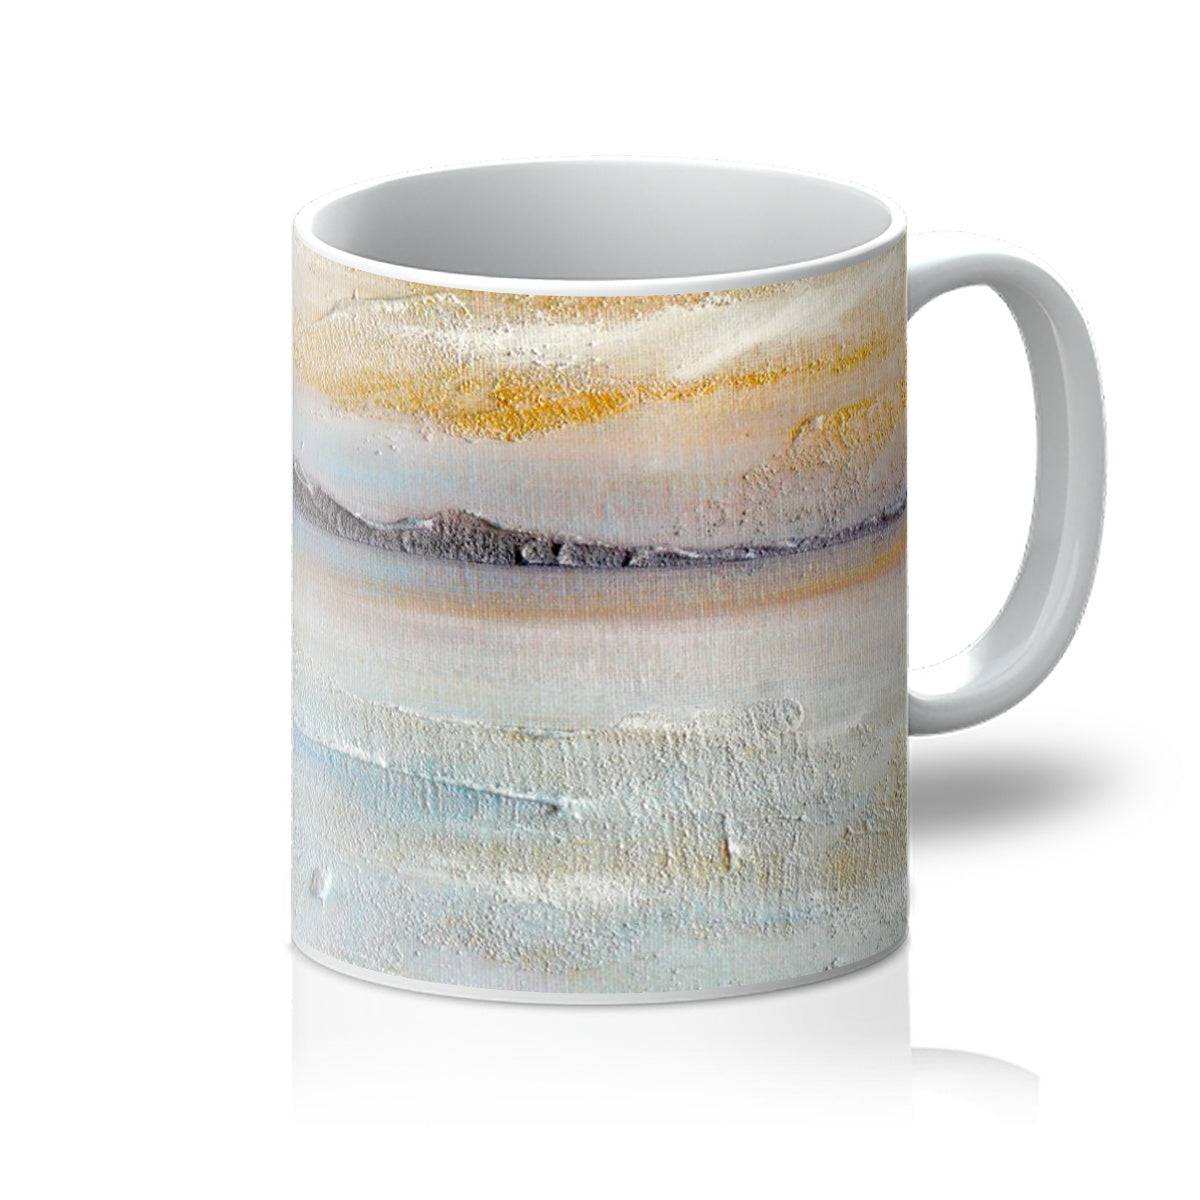 Sollas Beach South Uist Art Gifts Mug-Mugs-Hebridean Islands Art Gallery-11oz-White-Paintings, Prints, Homeware, Art Gifts From Scotland By Scottish Artist Kevin Hunter